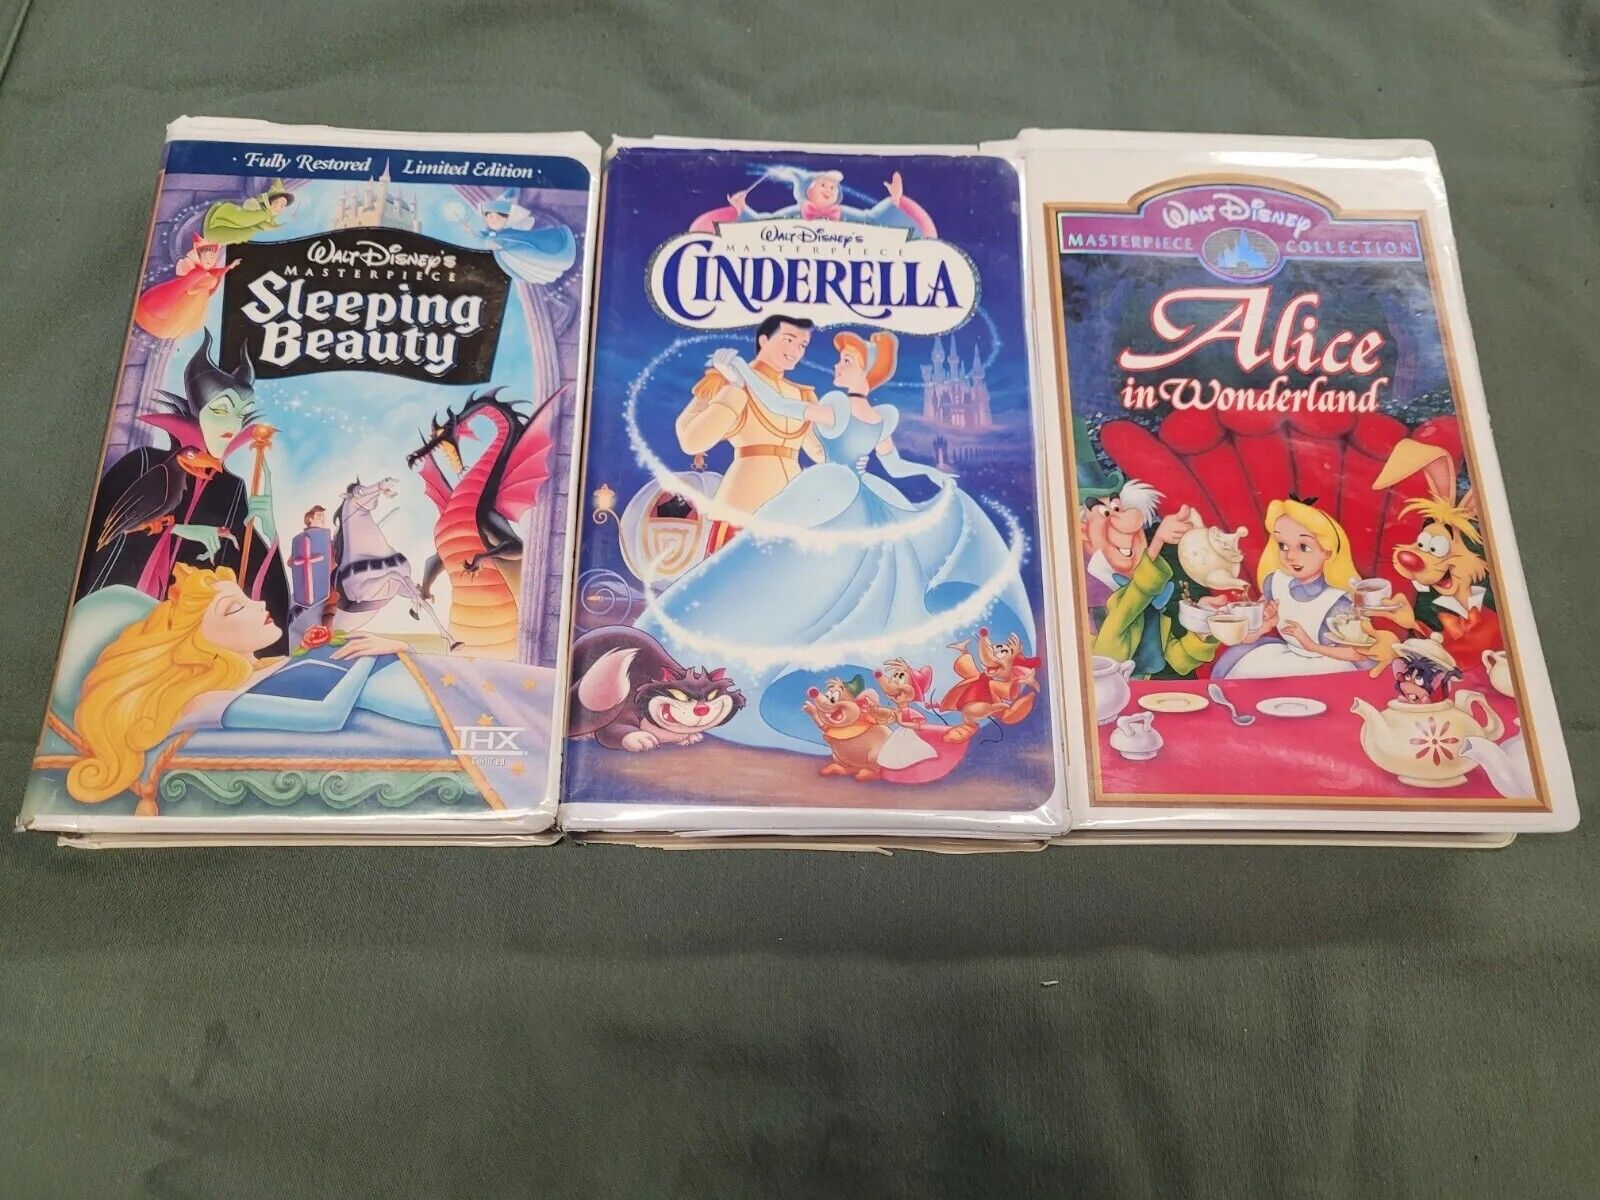 Vintage VHS Disney Movies by the lot. Used. Good Conditions.